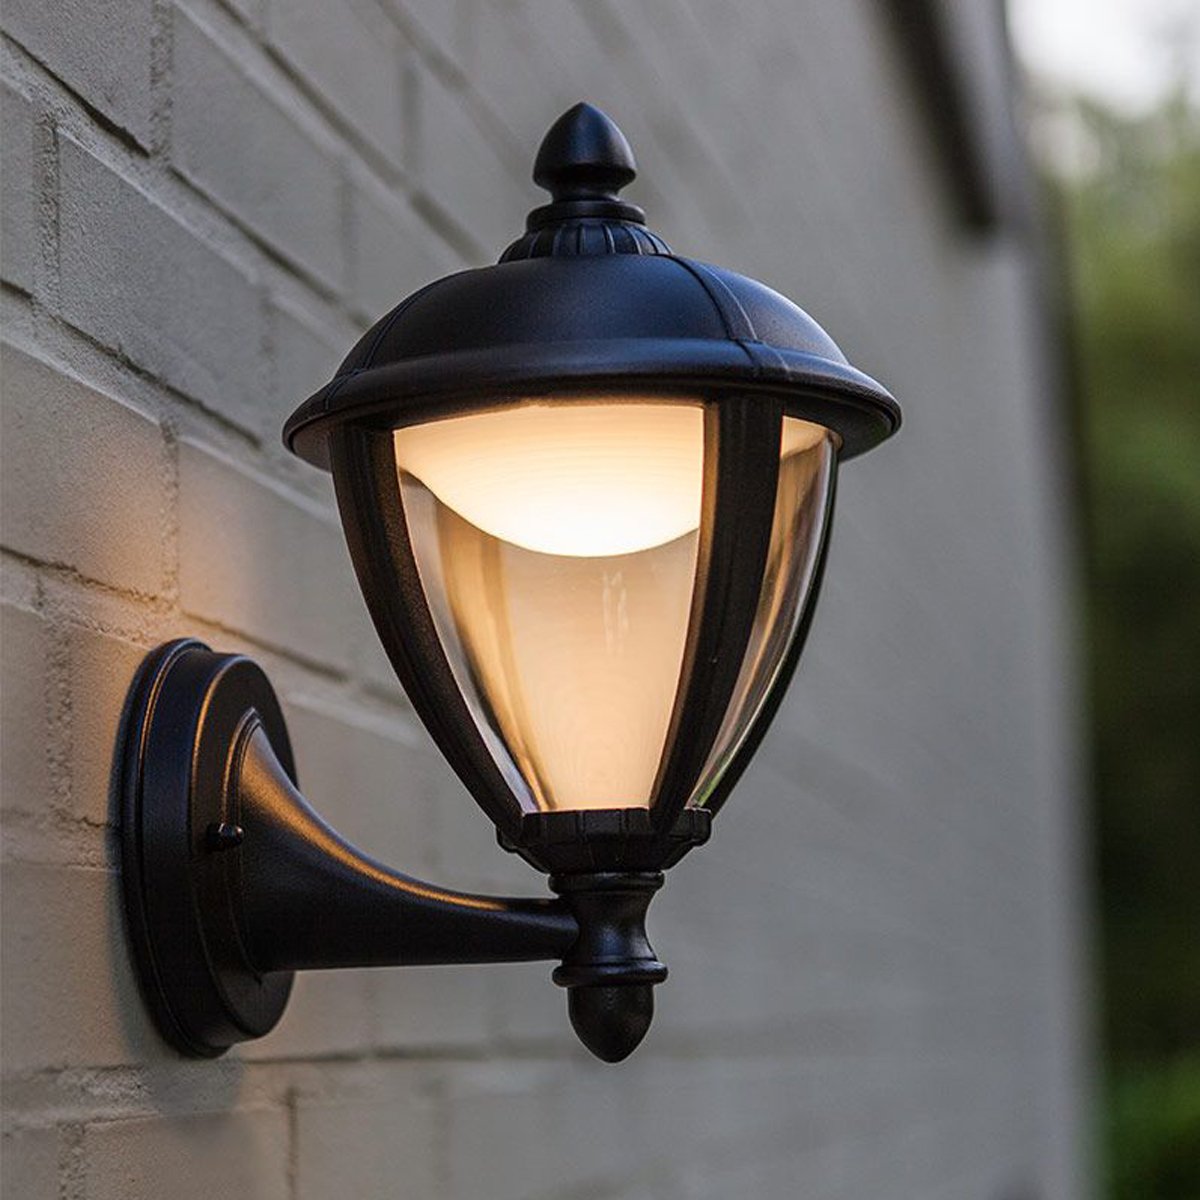 Our Cindy lantern wall light delivers on style and durability and is a smart choice for your exterior lighting. With its black aluminium construction teamed with clear panes, this lantern is hardwearing and rust and weatherproof. Built for life outdoors, it has an IP44 rating which means it can withstand the harshest of weather conditions. For sophisticated yet robust outdoor lighting, our Cindy black outdoor traditional lantern is a strong contender.